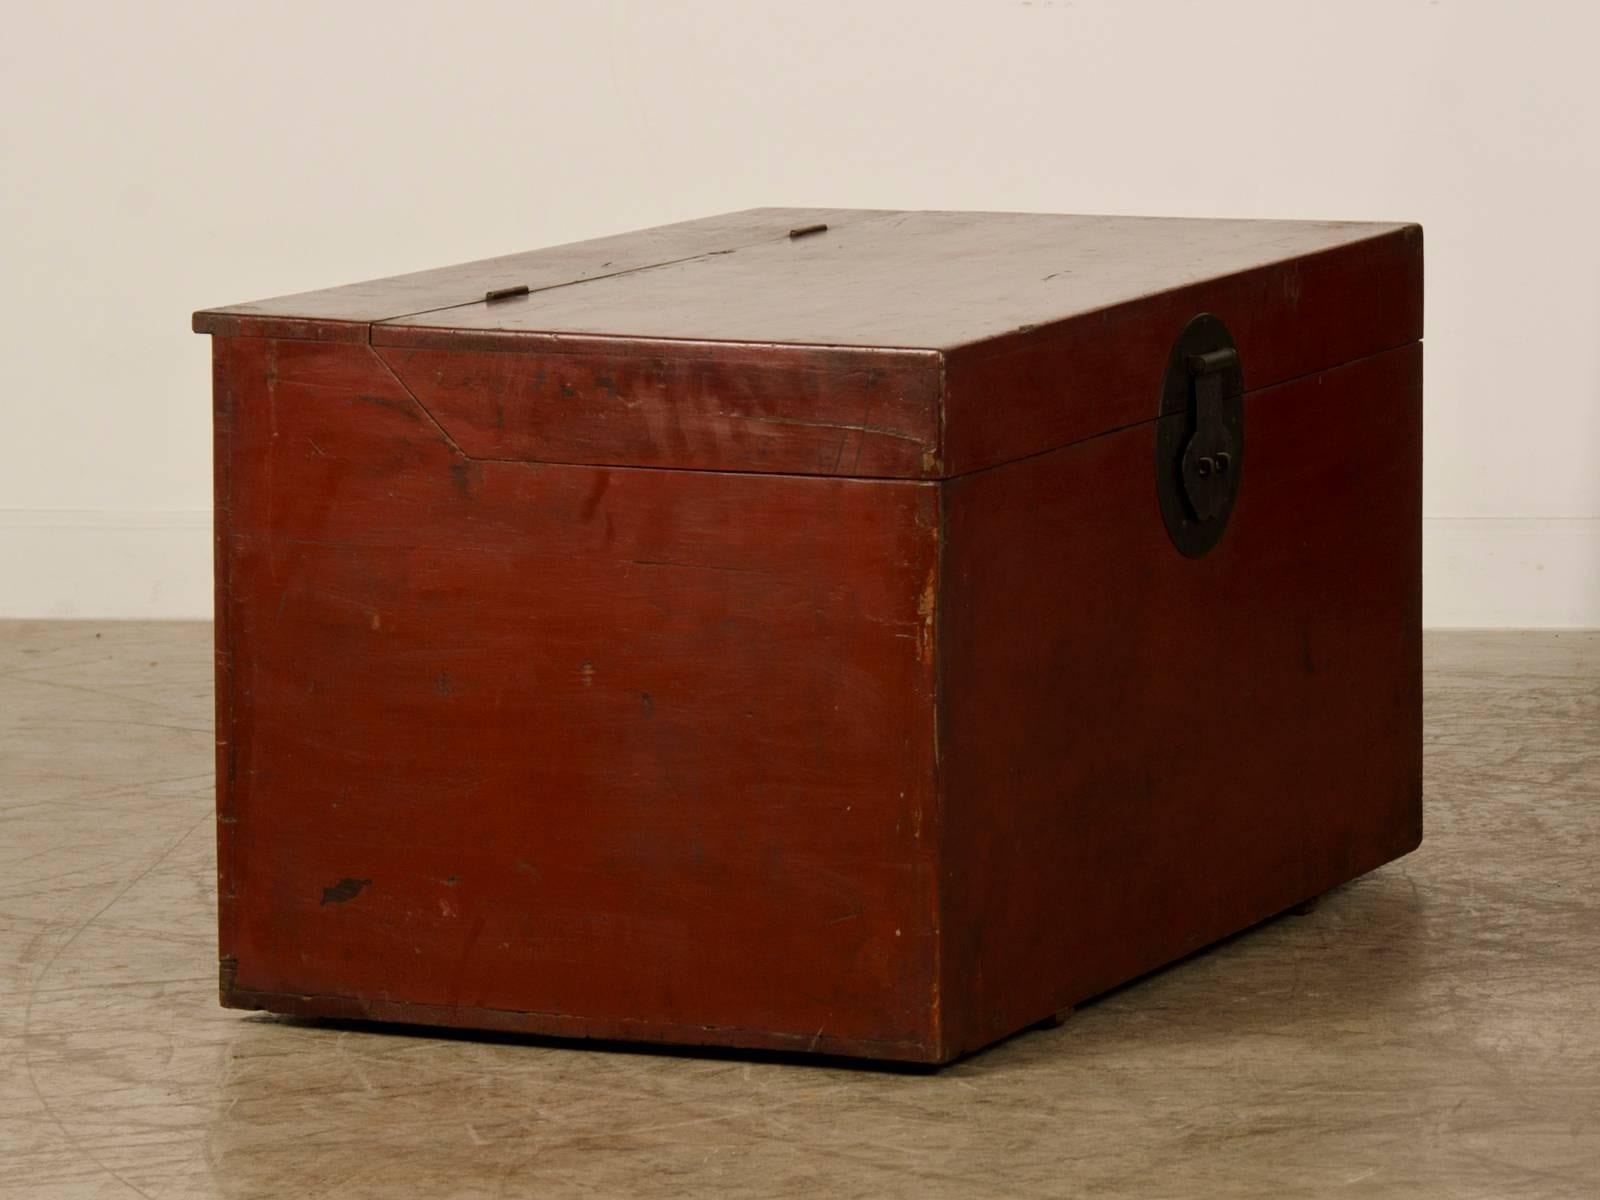 Bronzed Large Antique Chinese Red Lacquer Trunk Kuang Hsu Period, circa 1875 For Sale